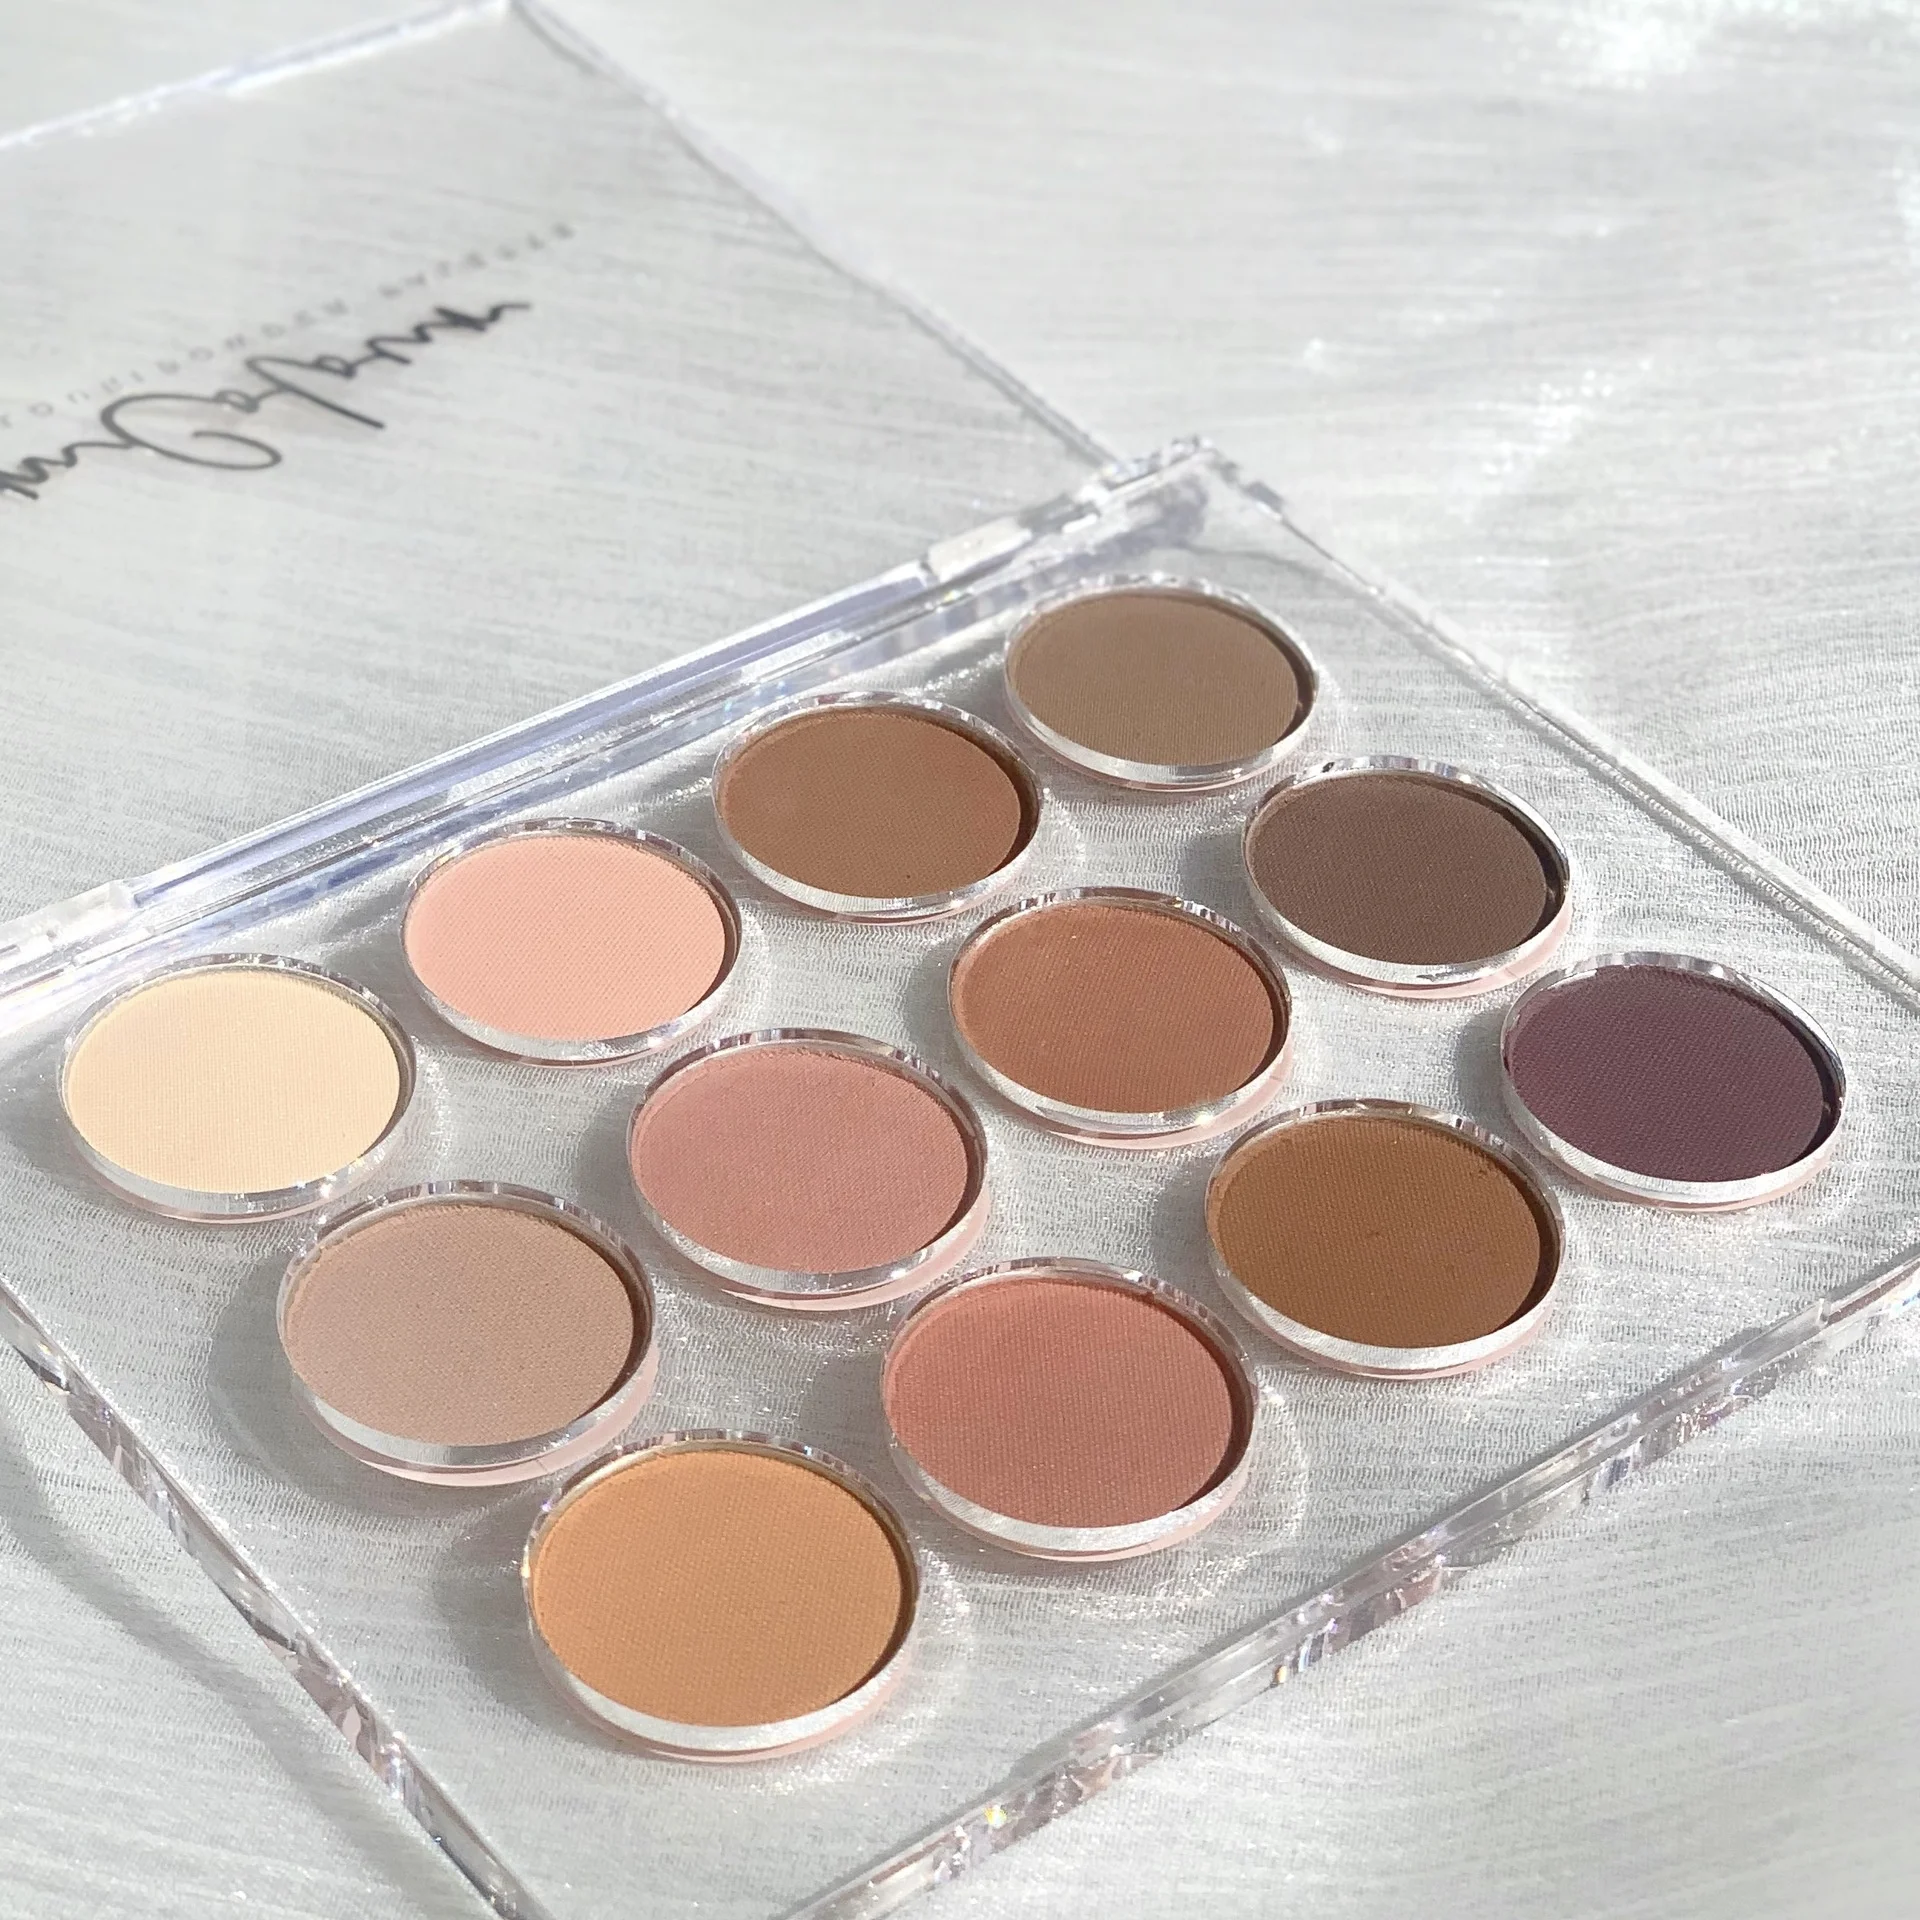 

New Products Waterproof 15 Color Professional Nude Eyeshadow Maquiagem Maquillaje Paletas De Sombras Eye Shadow Palette, Above eight colors